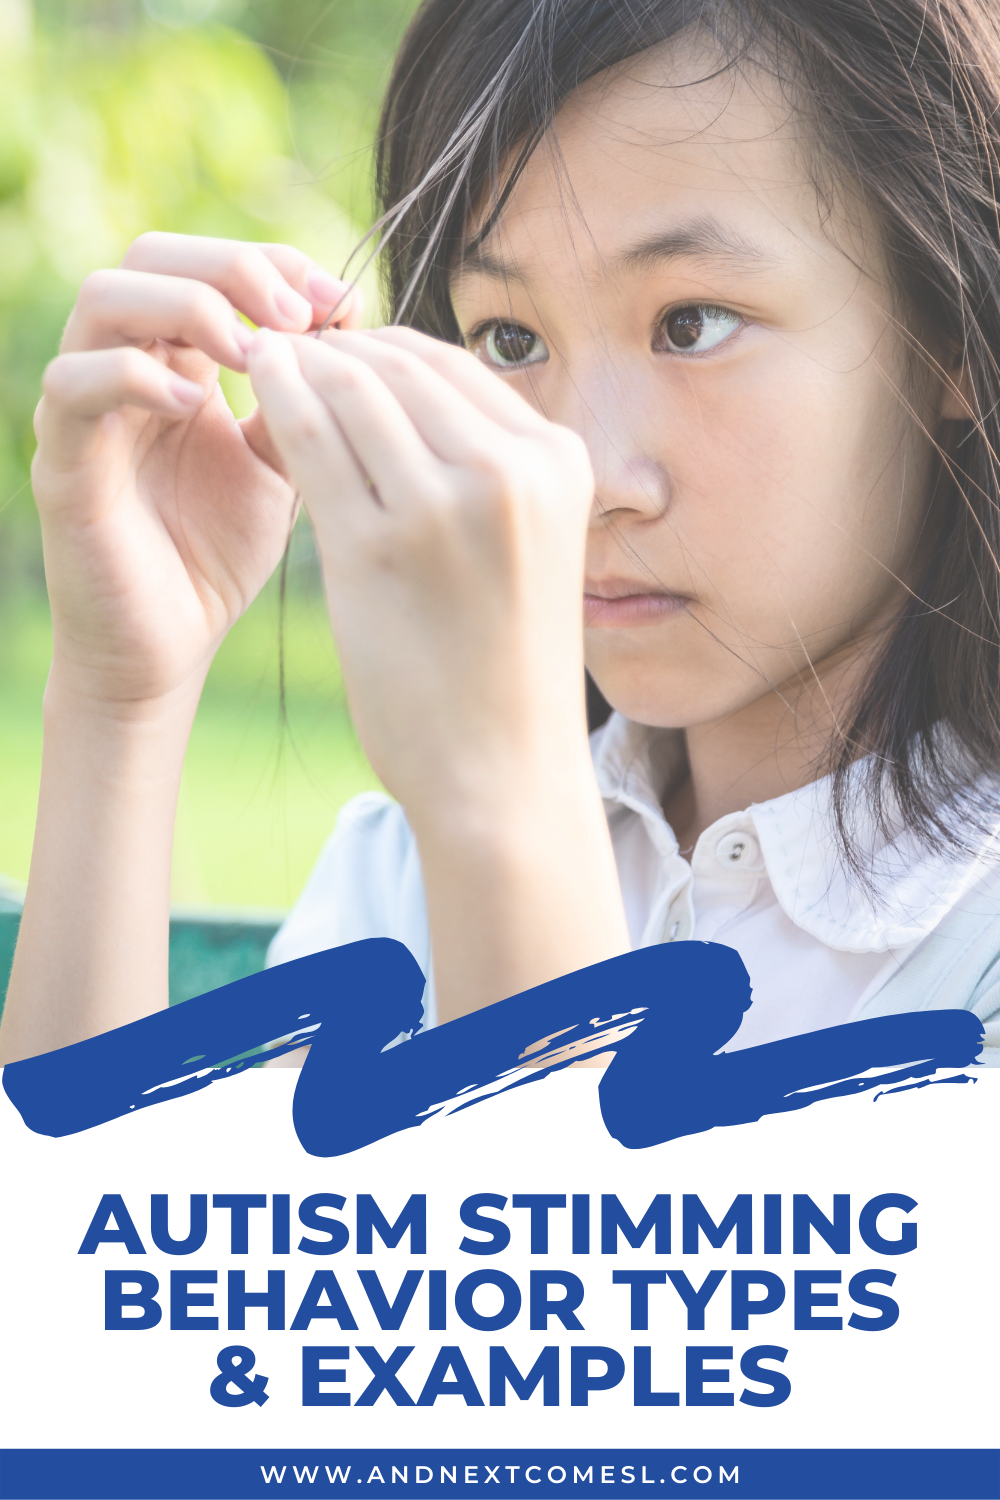 Stimming behaviors in autism: a look at different types of stimming in autism and common examples of stimming in autism